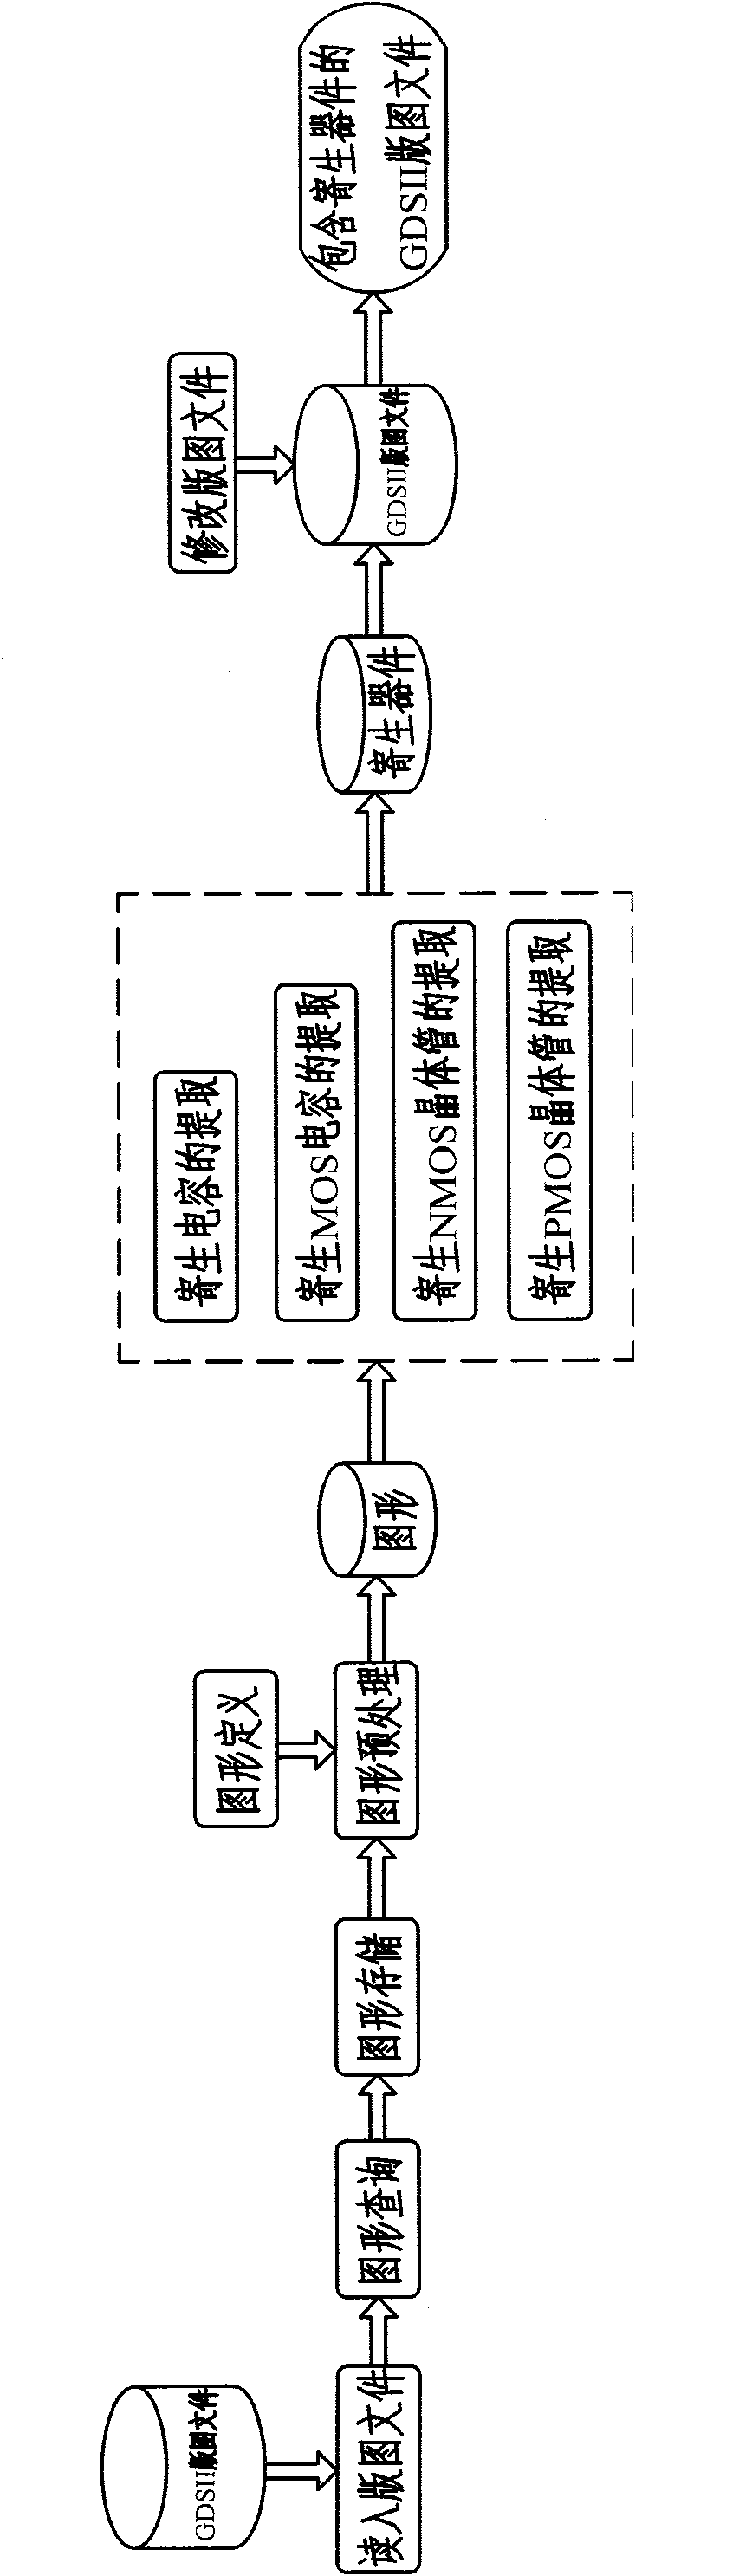 System and method for extracting parasitic components in analog integrated circuit layout